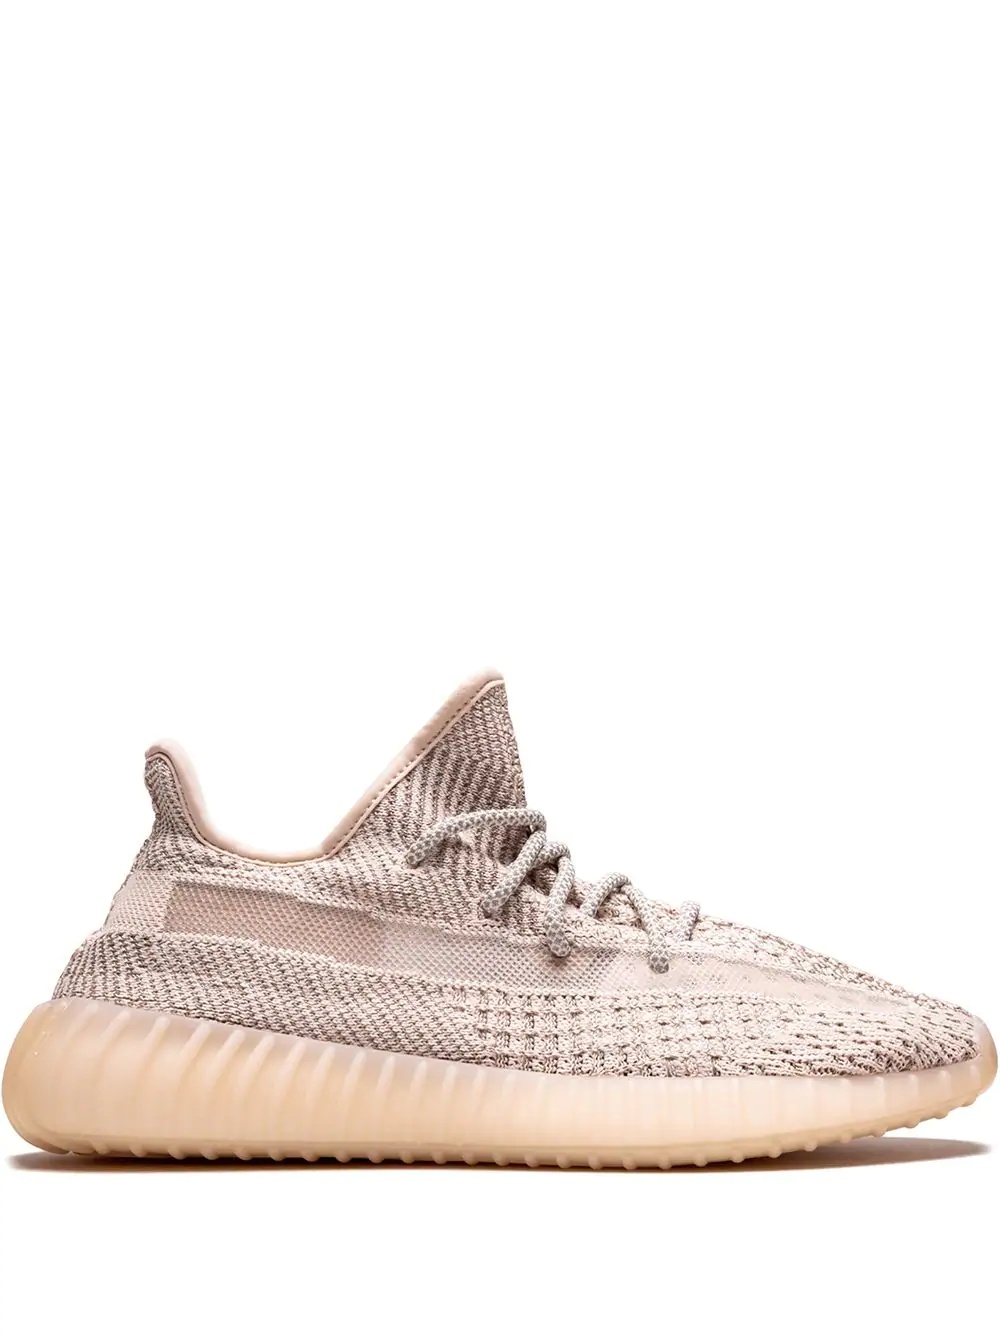 Yeezy Boost 350 V2 "Synth" - 1